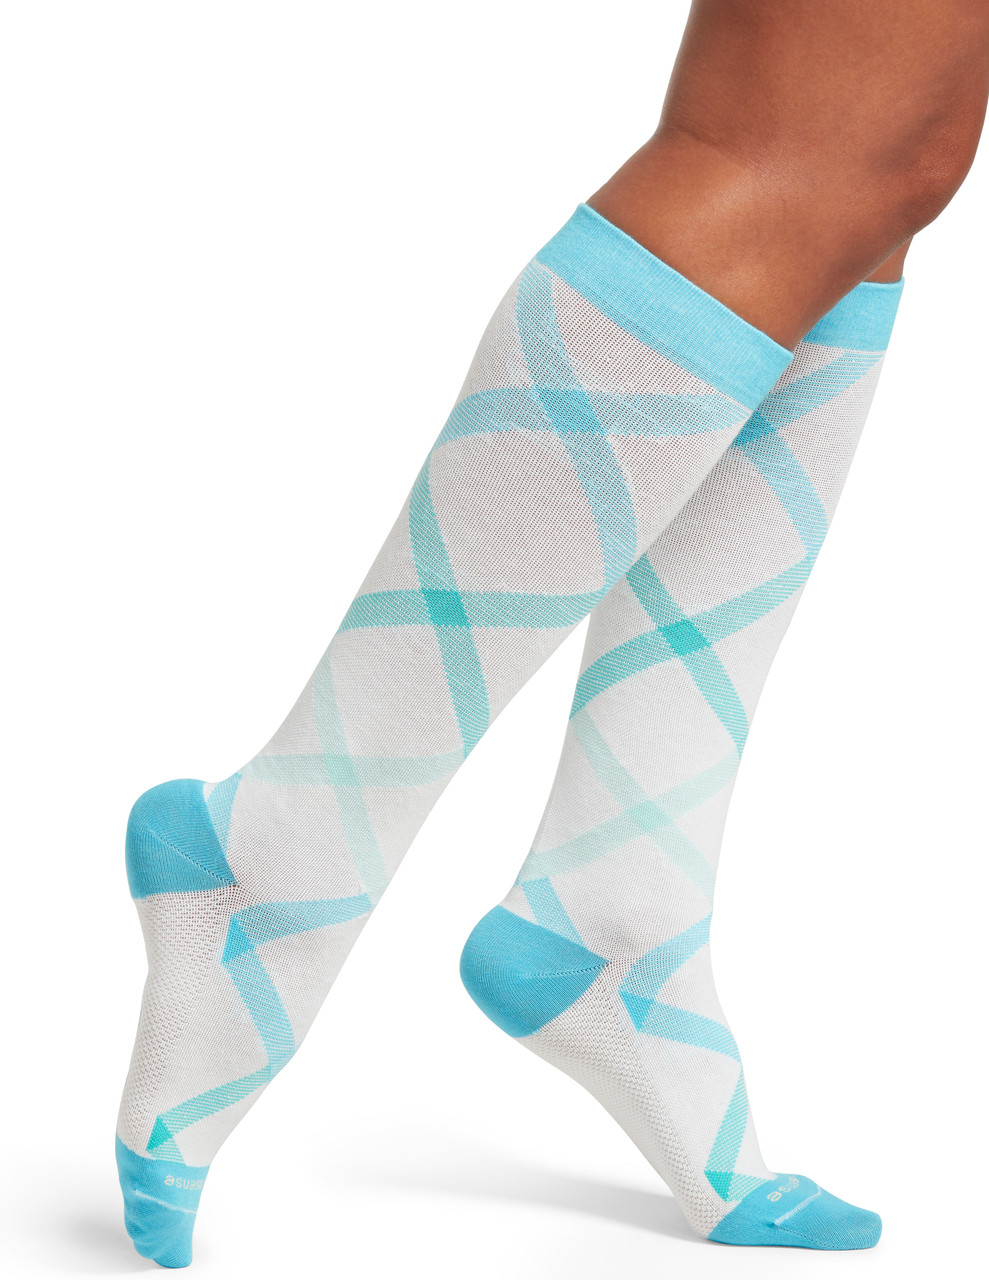 Women's White/Blue/Green Compression Socks with Grips Variety Pack - 2 Pairs